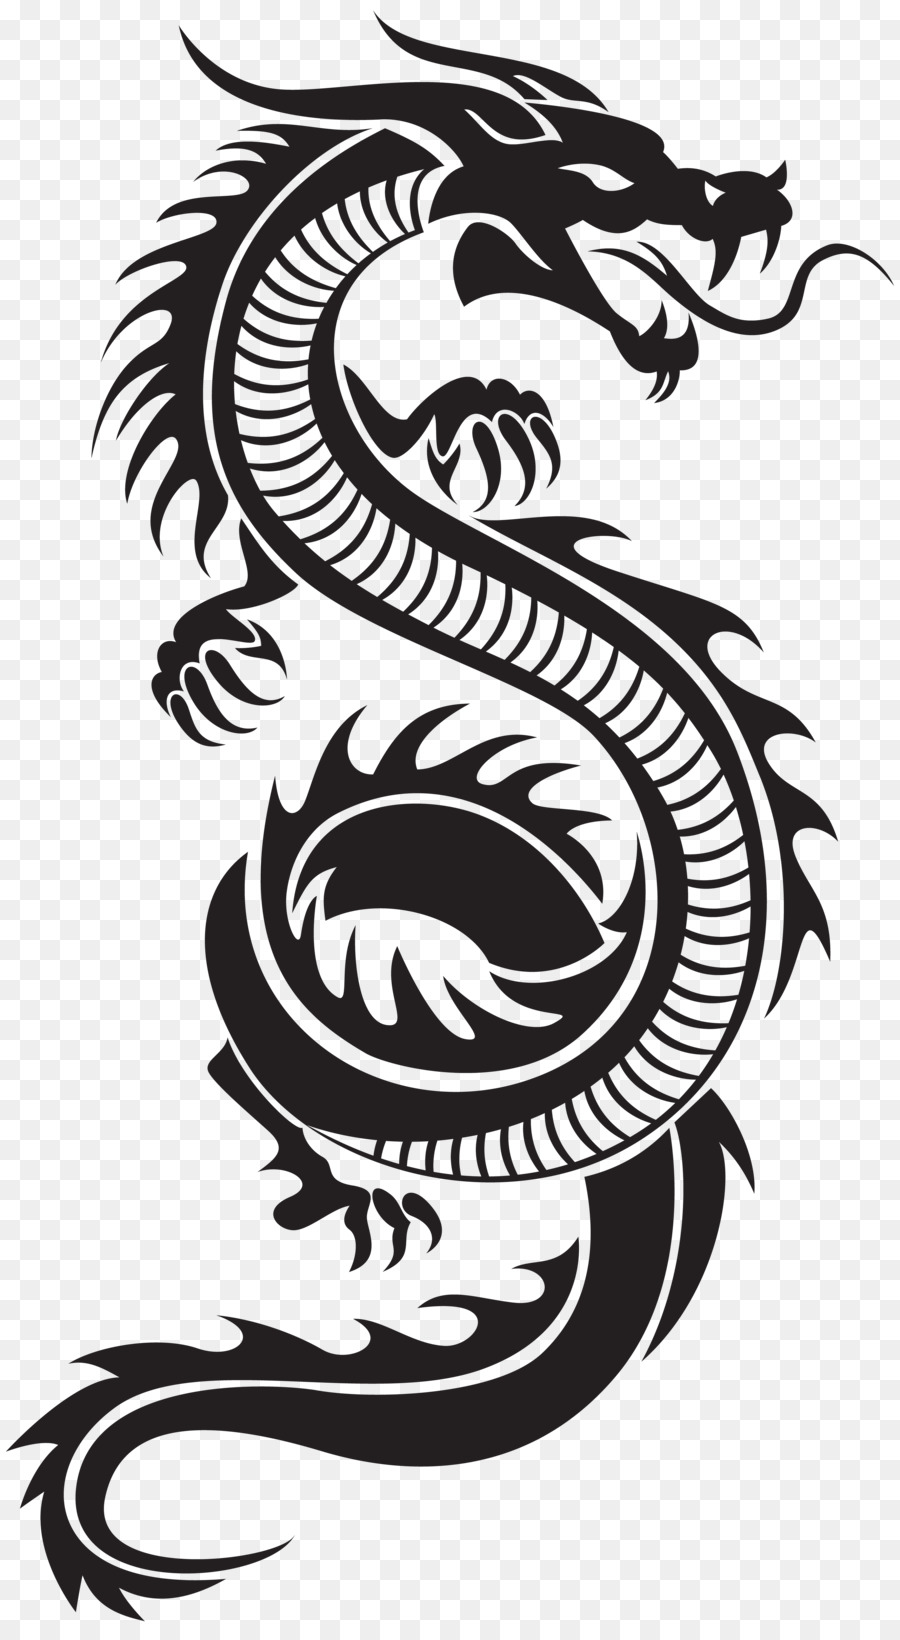 China Chinese dragon Chinese characters Clip art - Chinese style png download - 3308*6000 - Free Transparent China png Download.